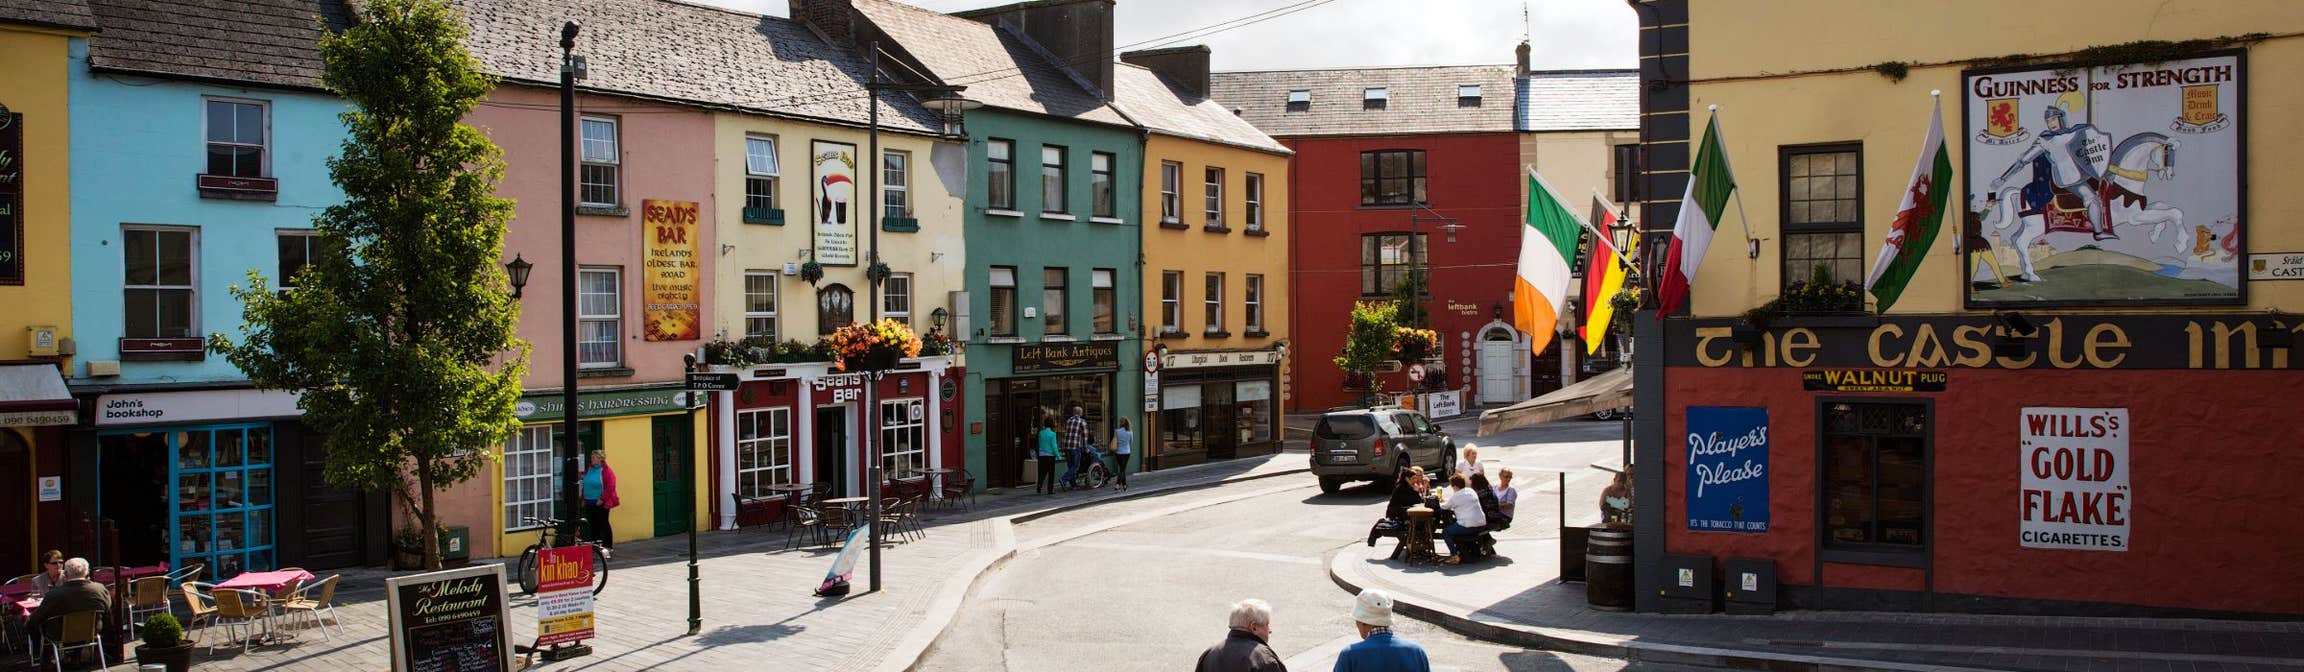 Image of Athlone town in County Westmeath